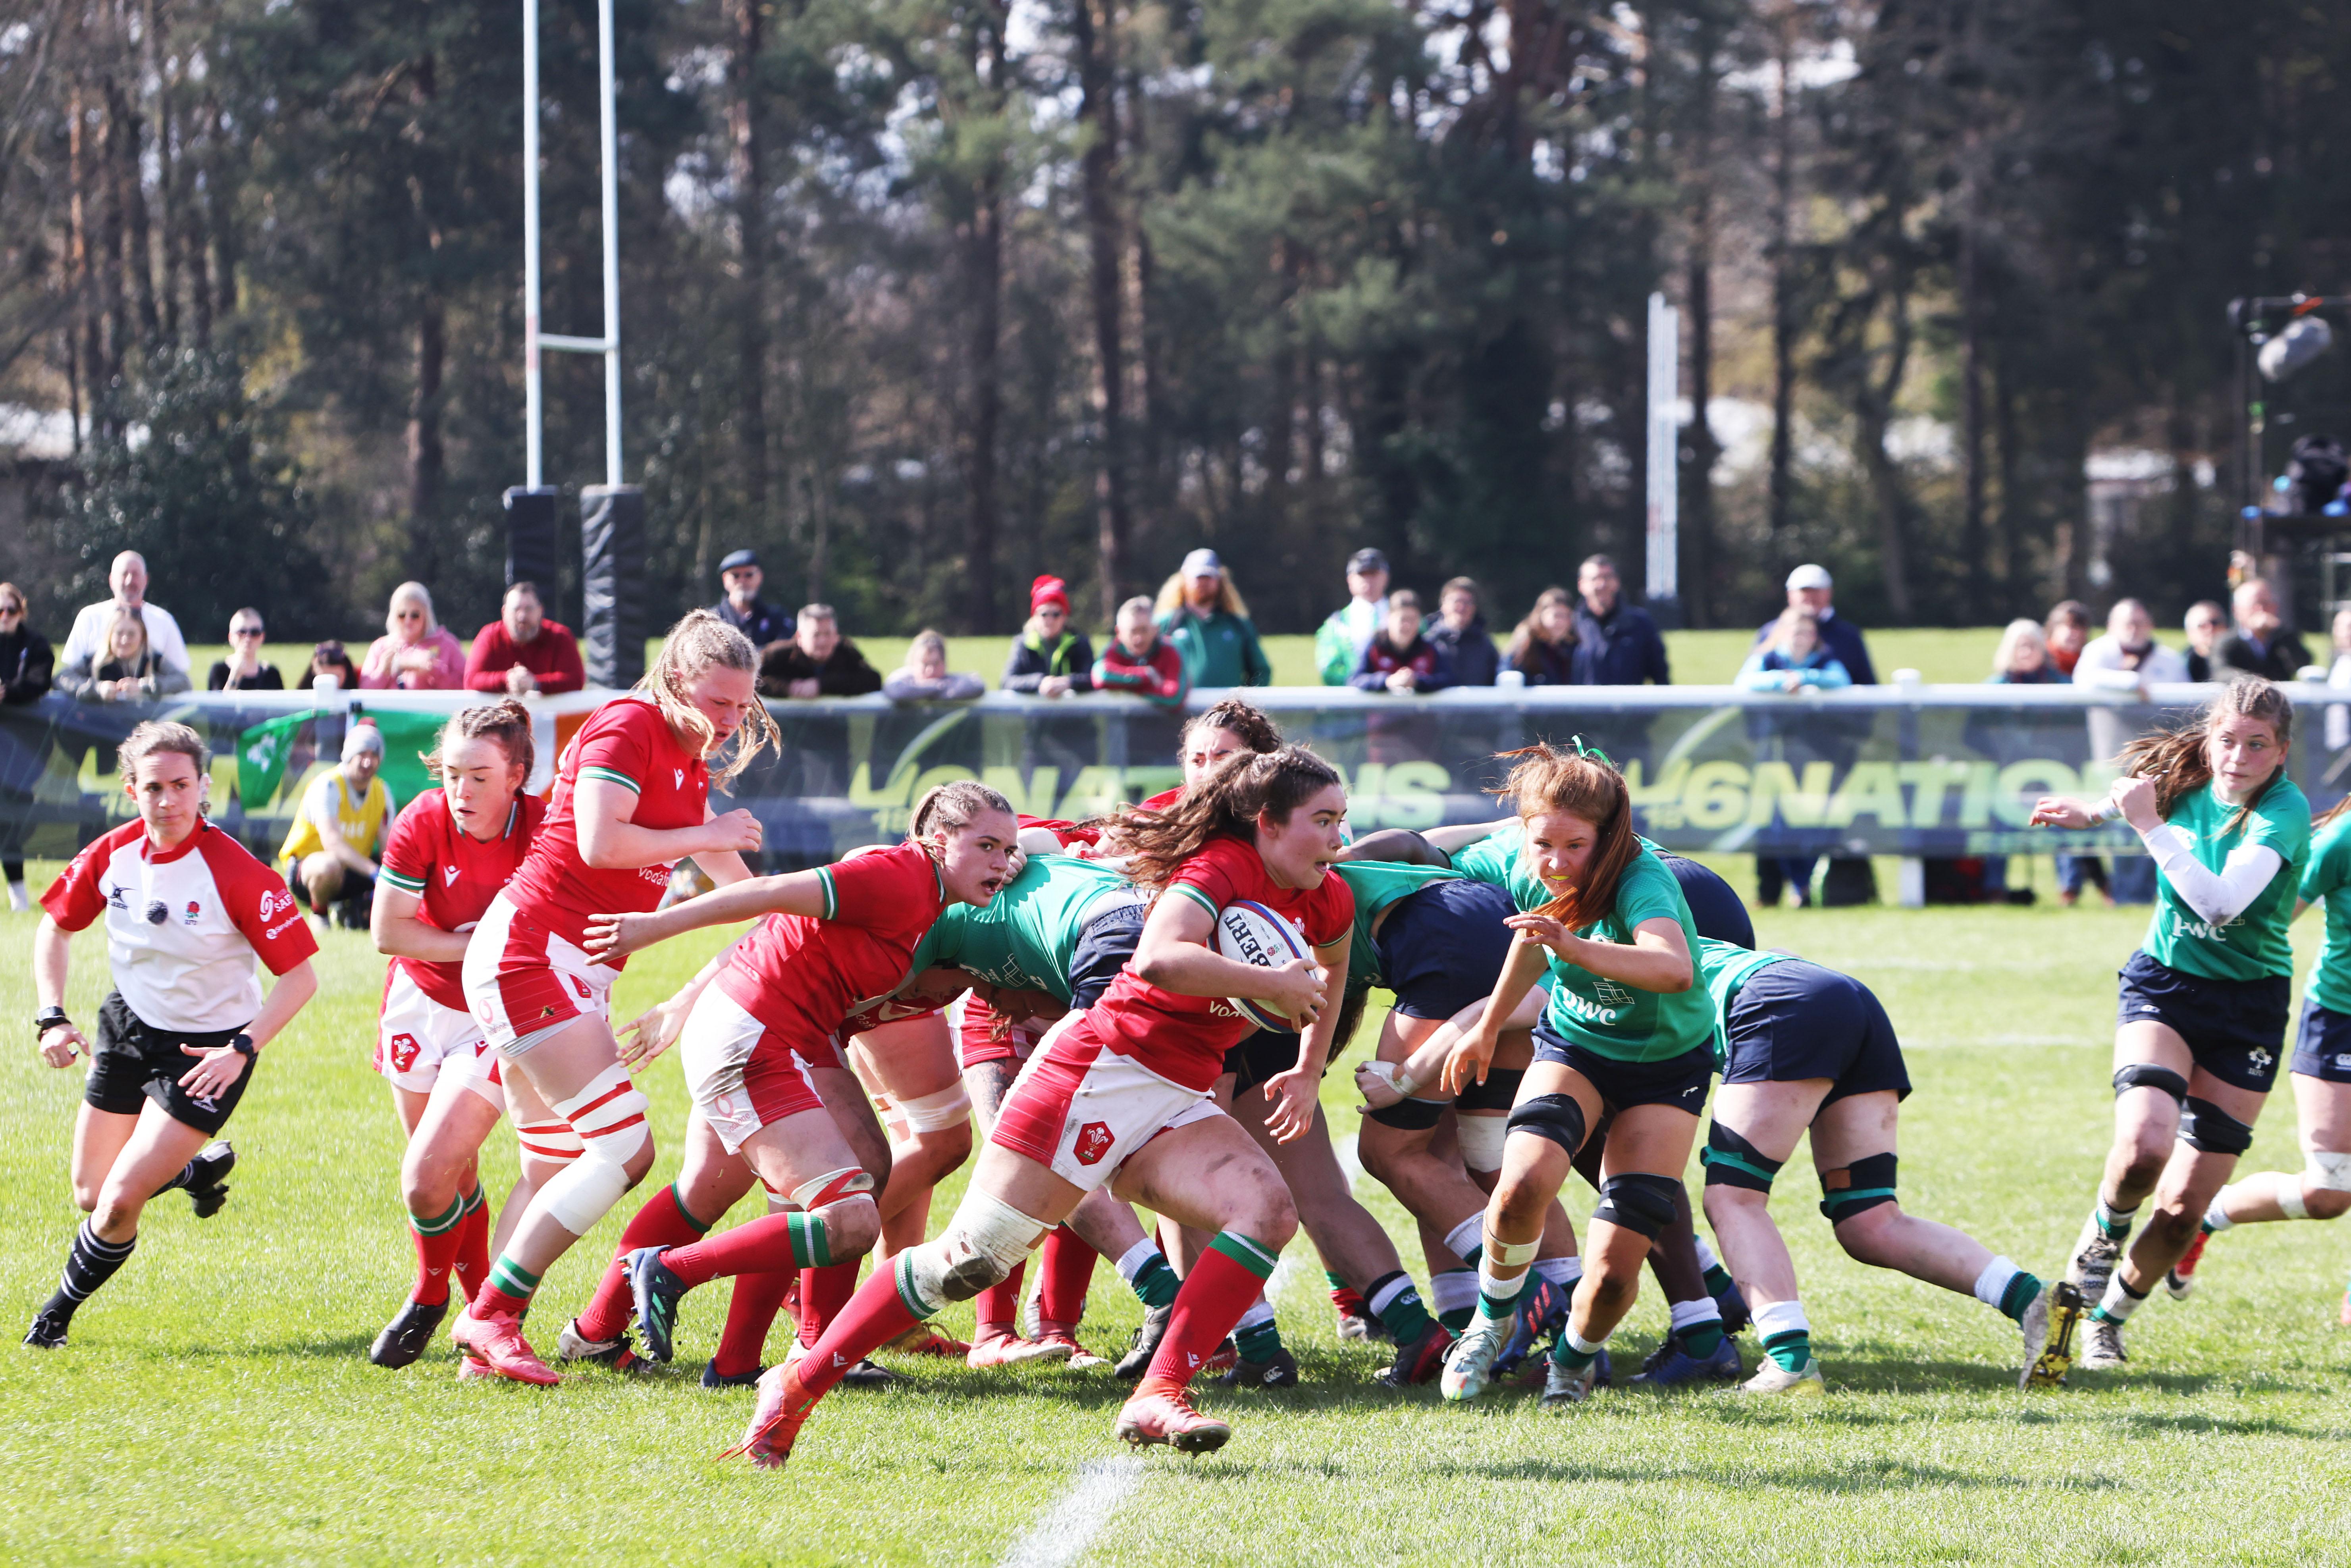 group of women in a rugby scrum